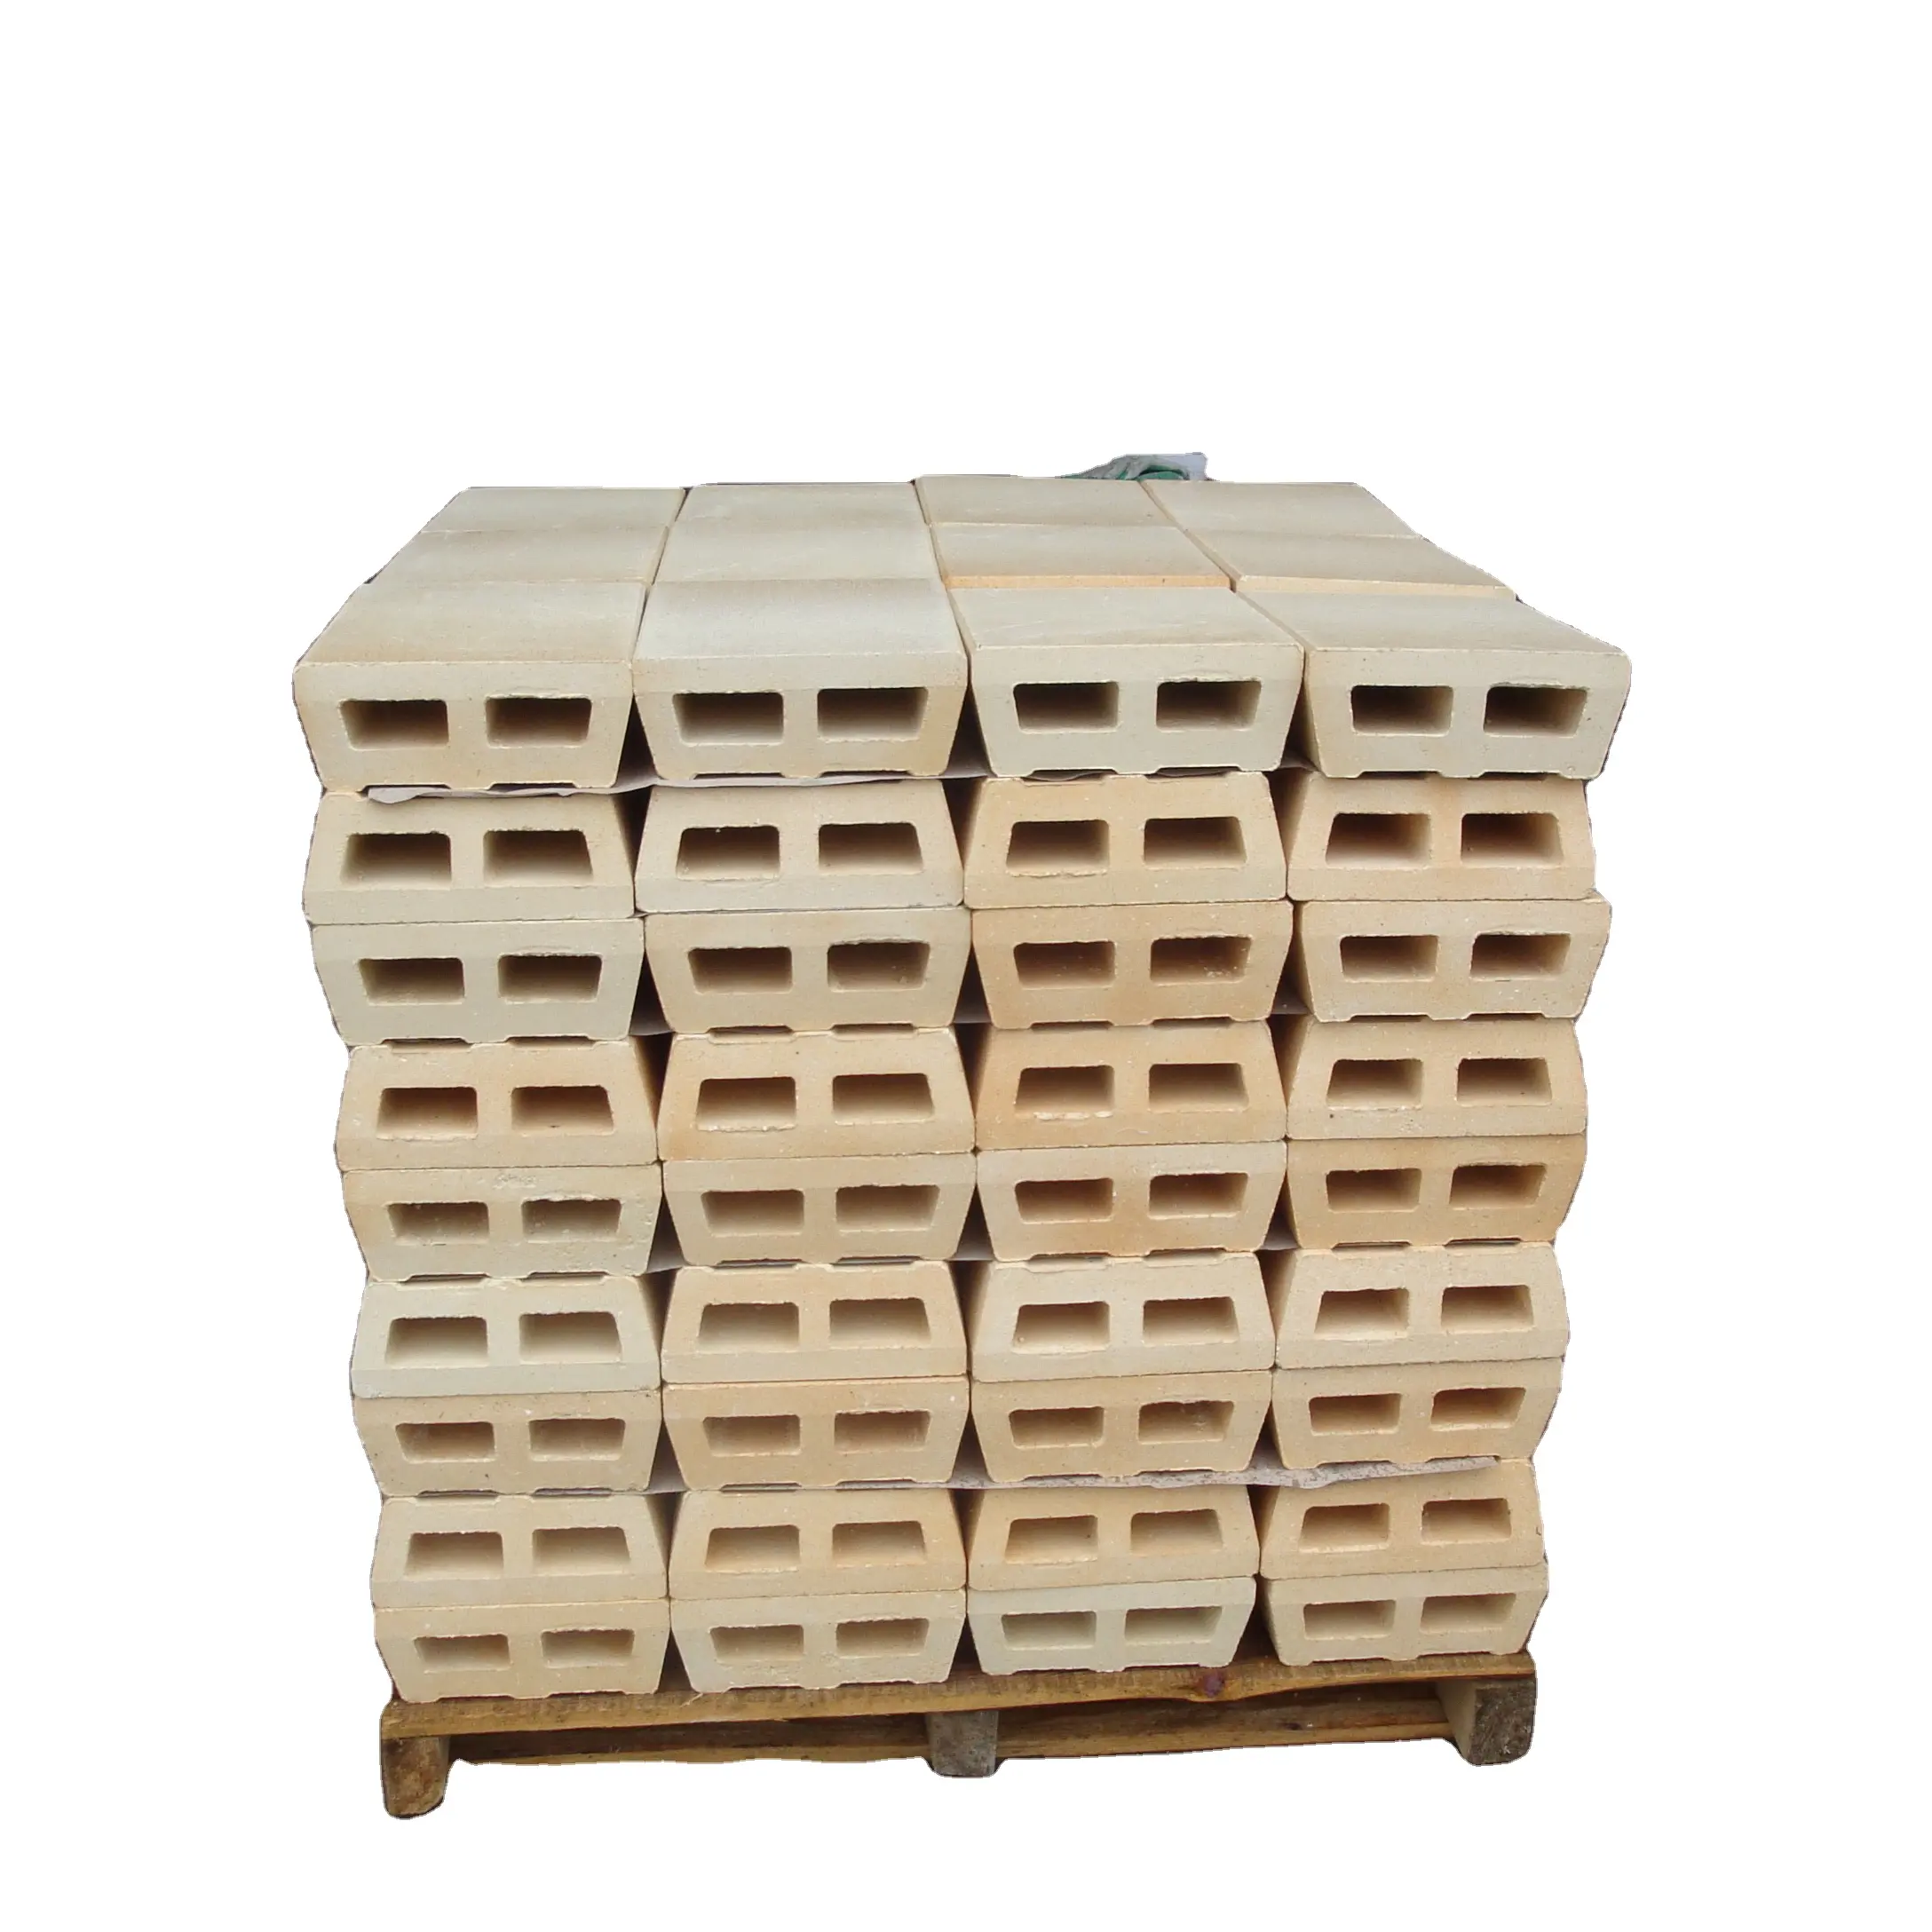 kiln car refractory mullite brick with hollow